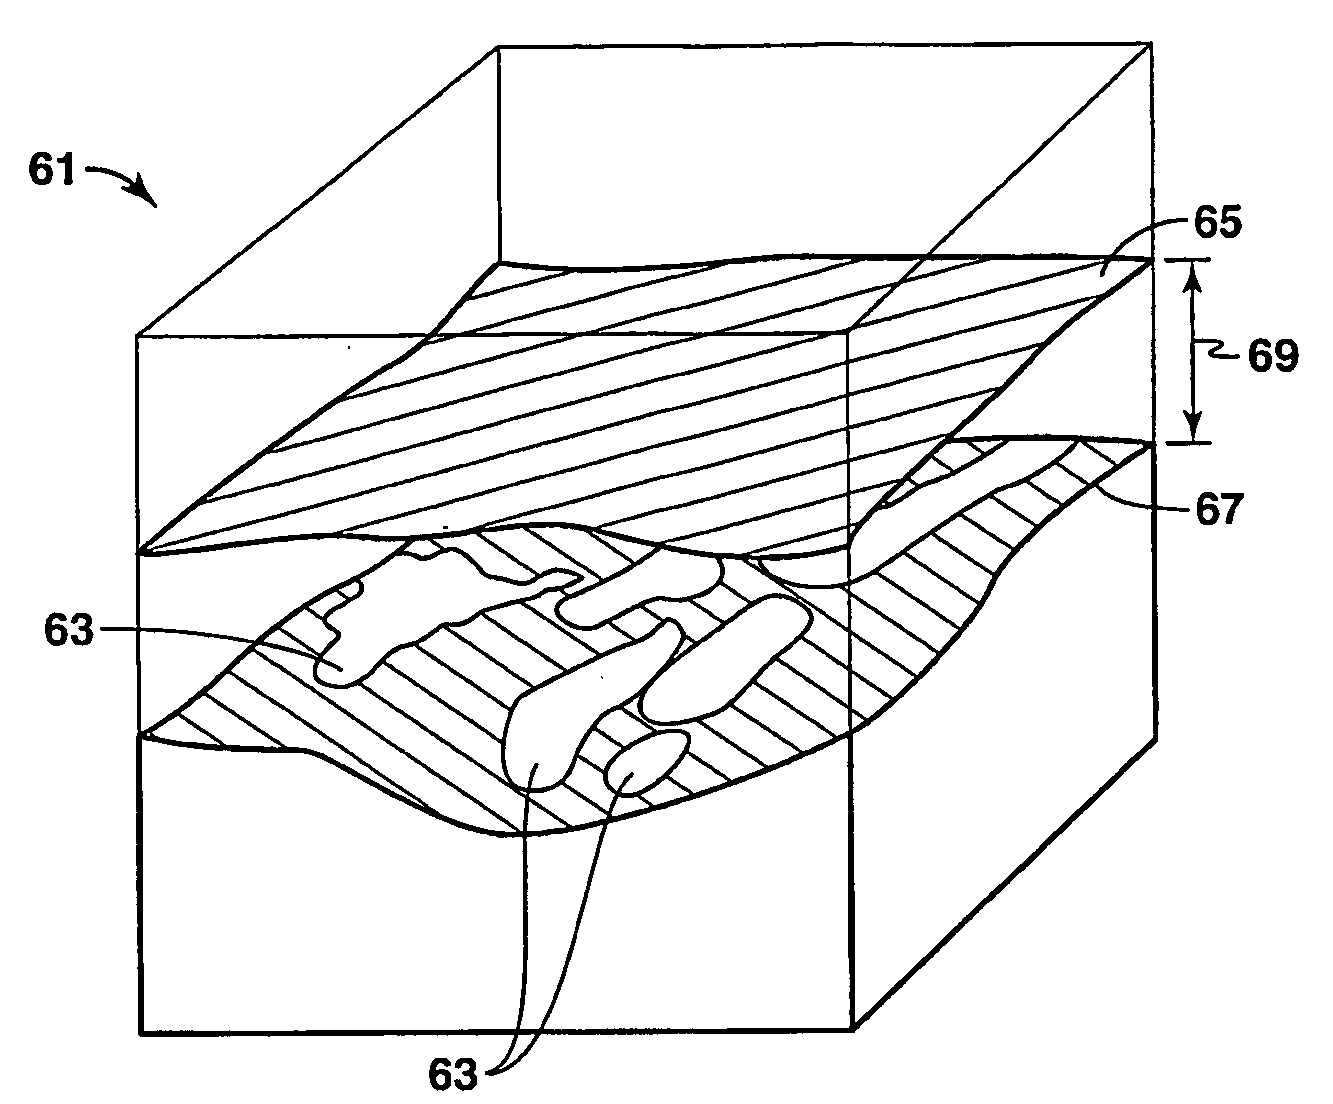 Method for Constructing Geologic Models of Subsurface Sedimentary Volumes